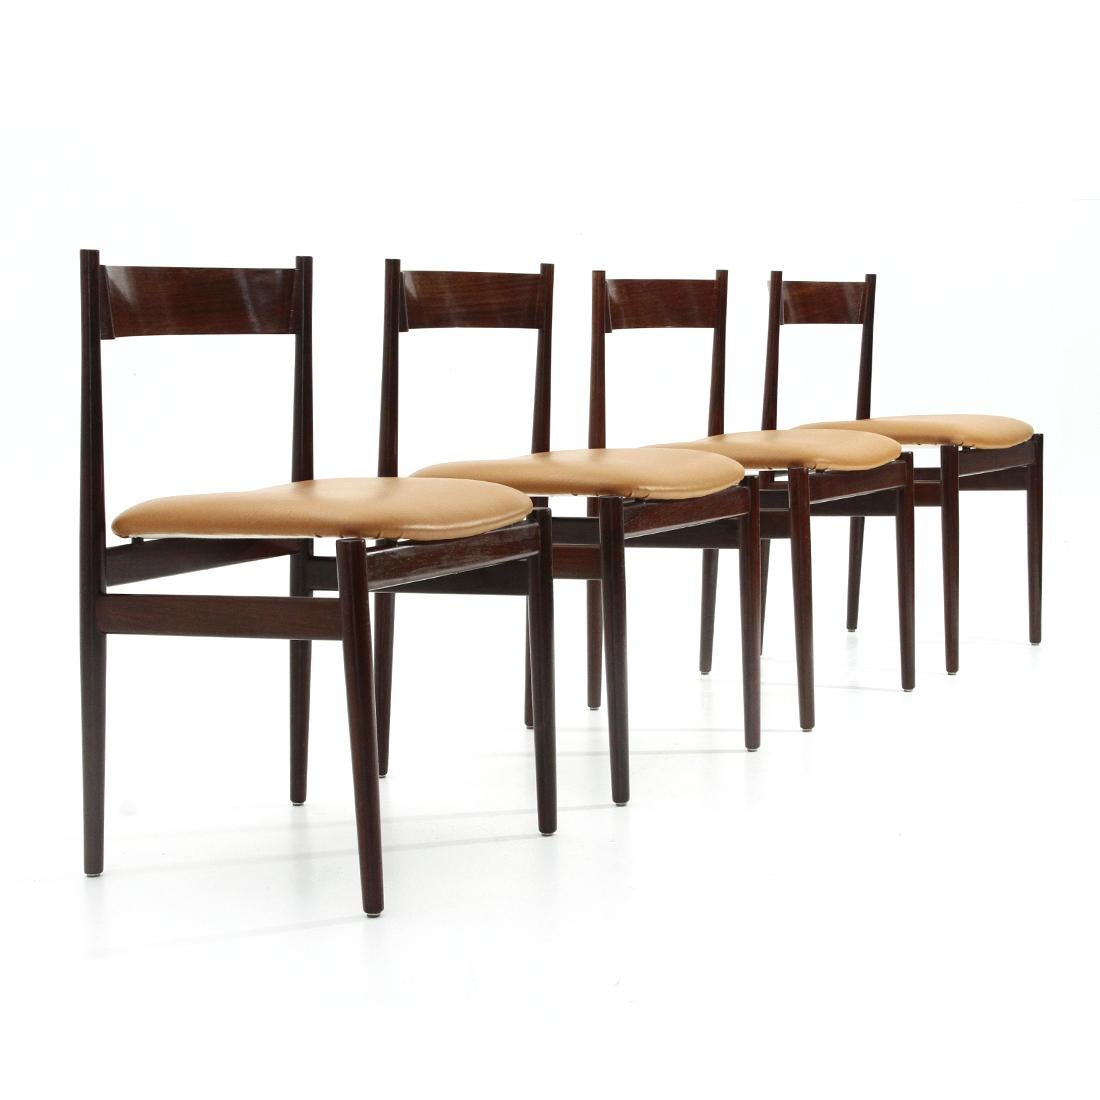 Mid-Century Modern 4 '107' Chairs by Gianfranco Frattini for Cassina, 1960s For Sale